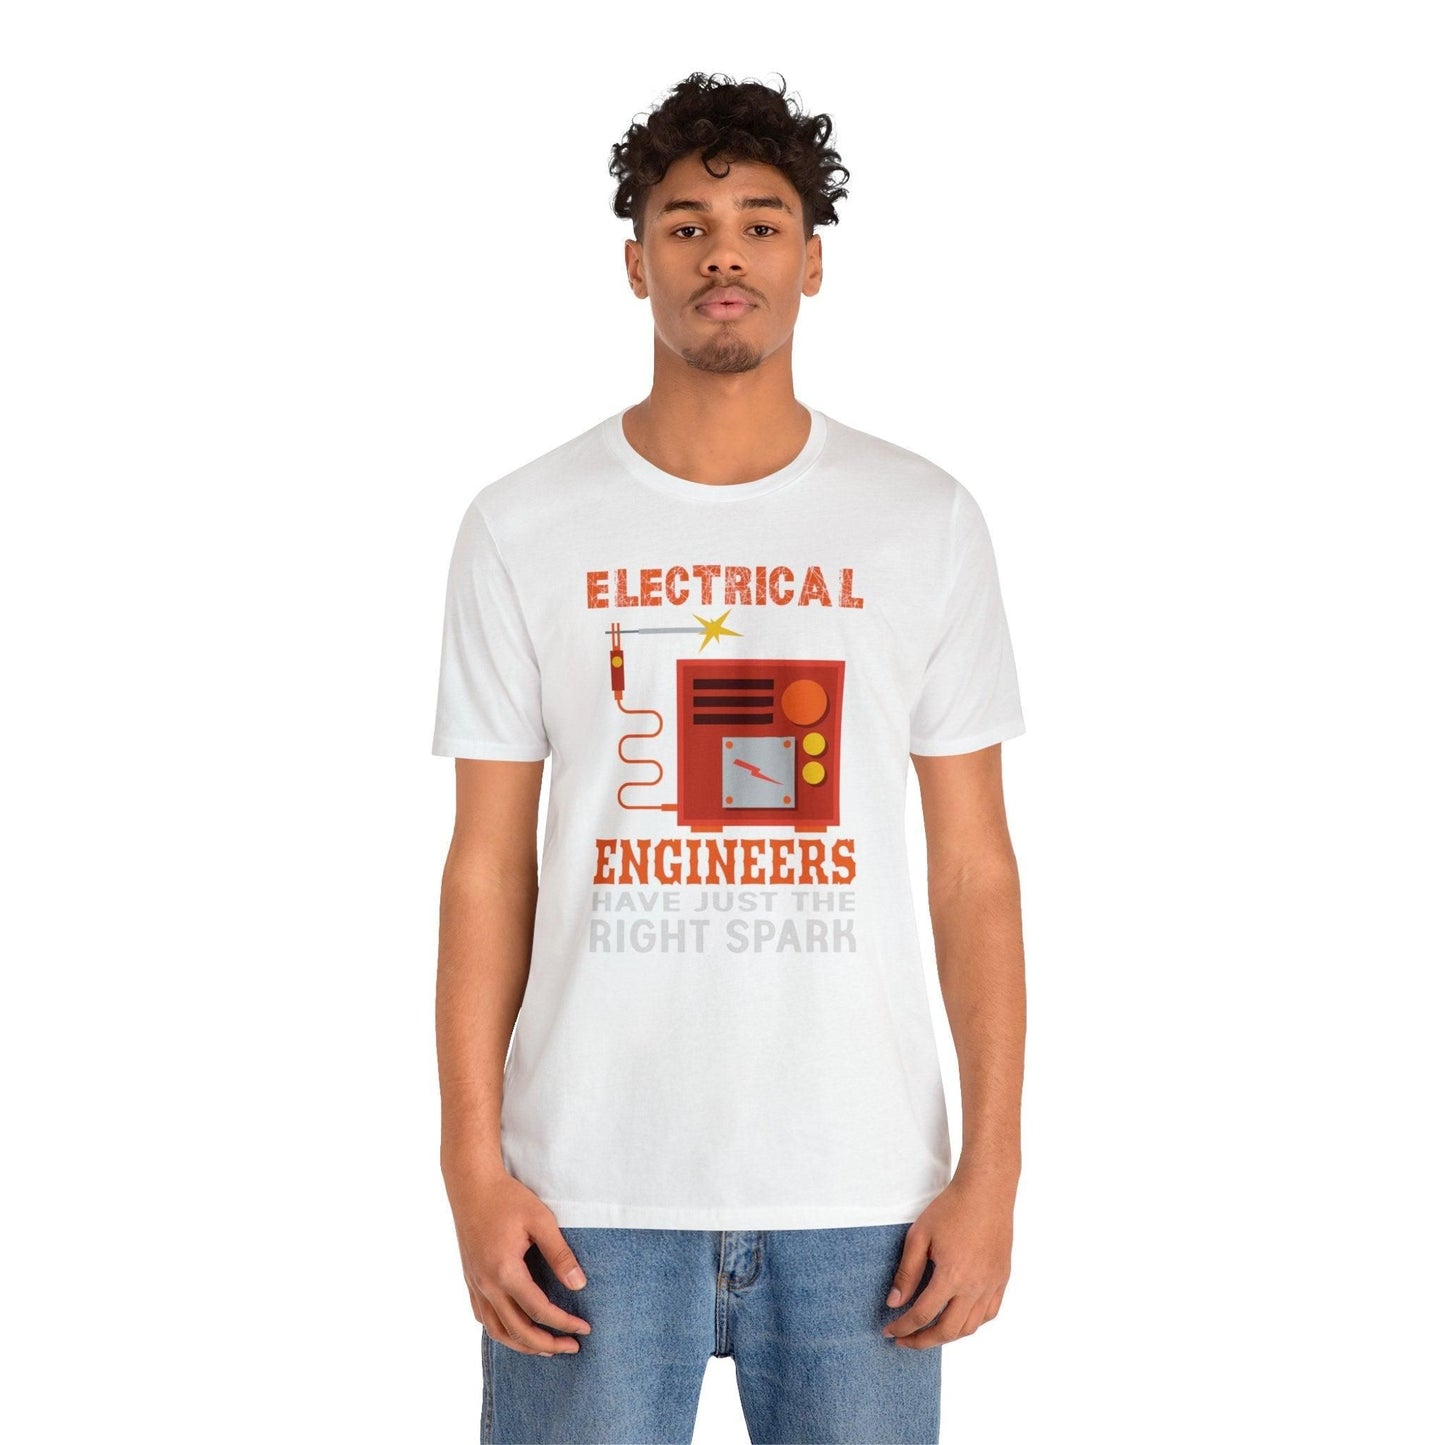 Electrical Engineering Unisex Tee T-Shirt Solid White Blend XS 